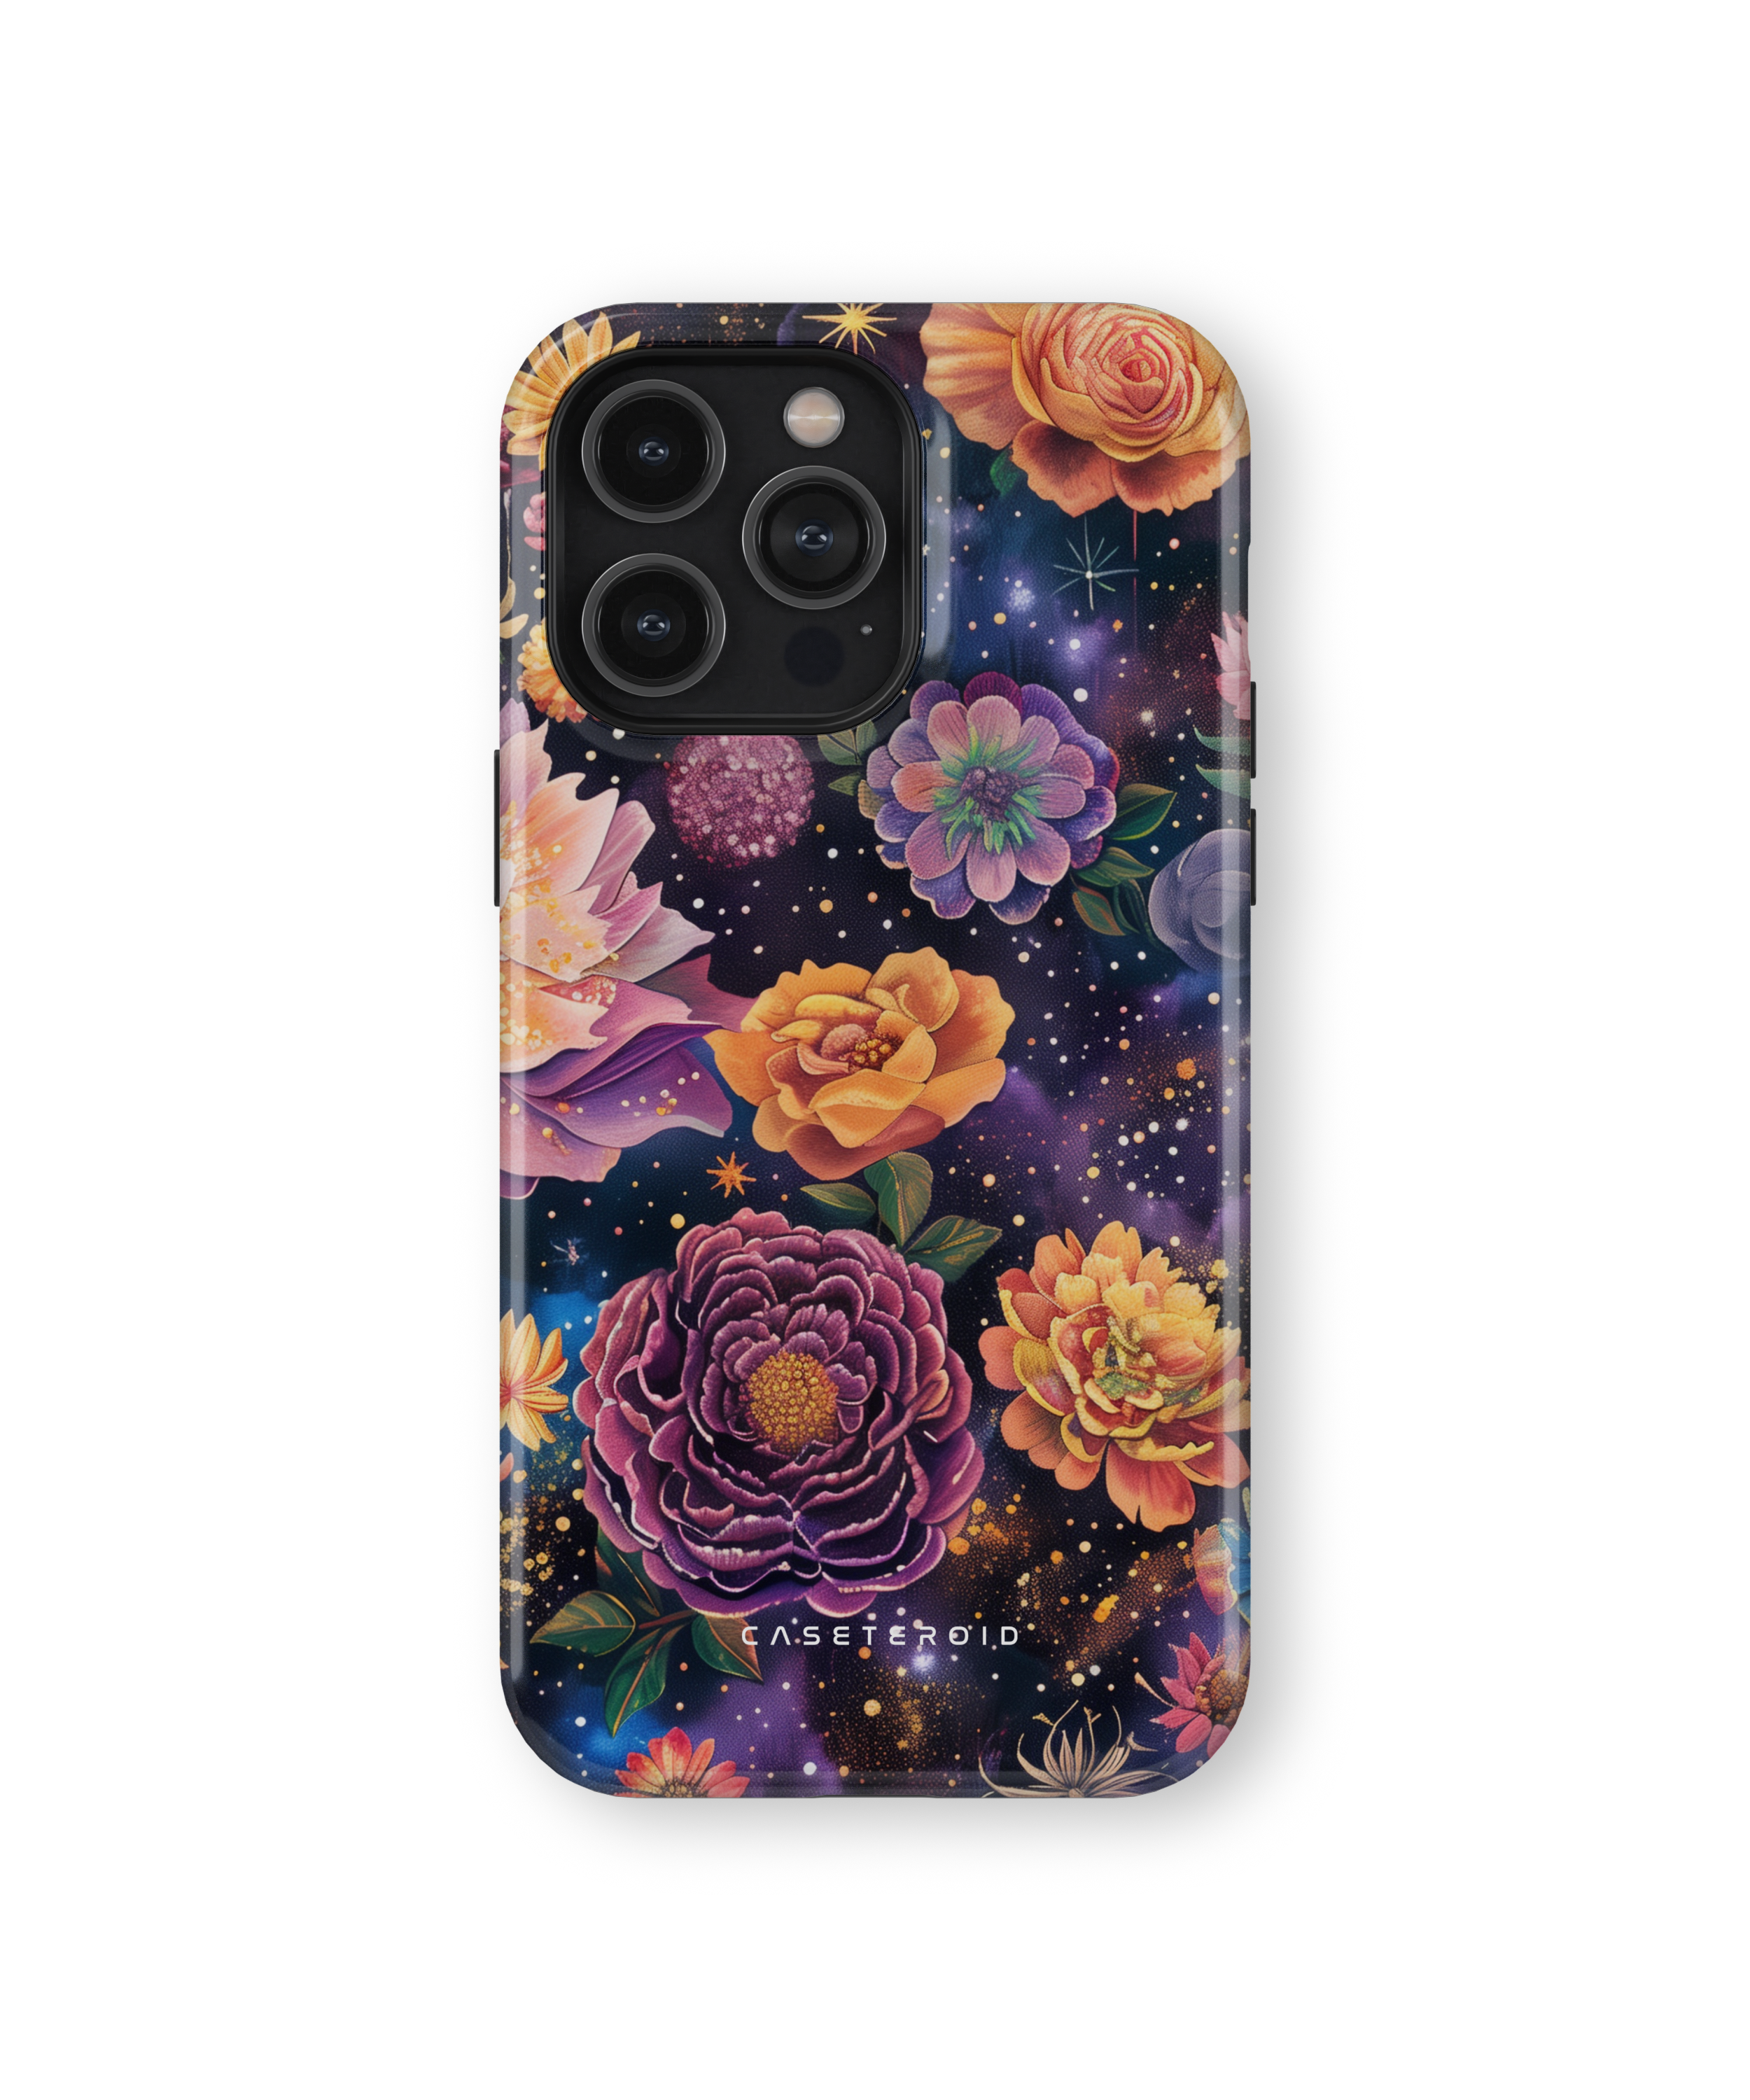 iPhone Tough Case with MagSafe - Stellar Petal Tapestry - CASETEROID